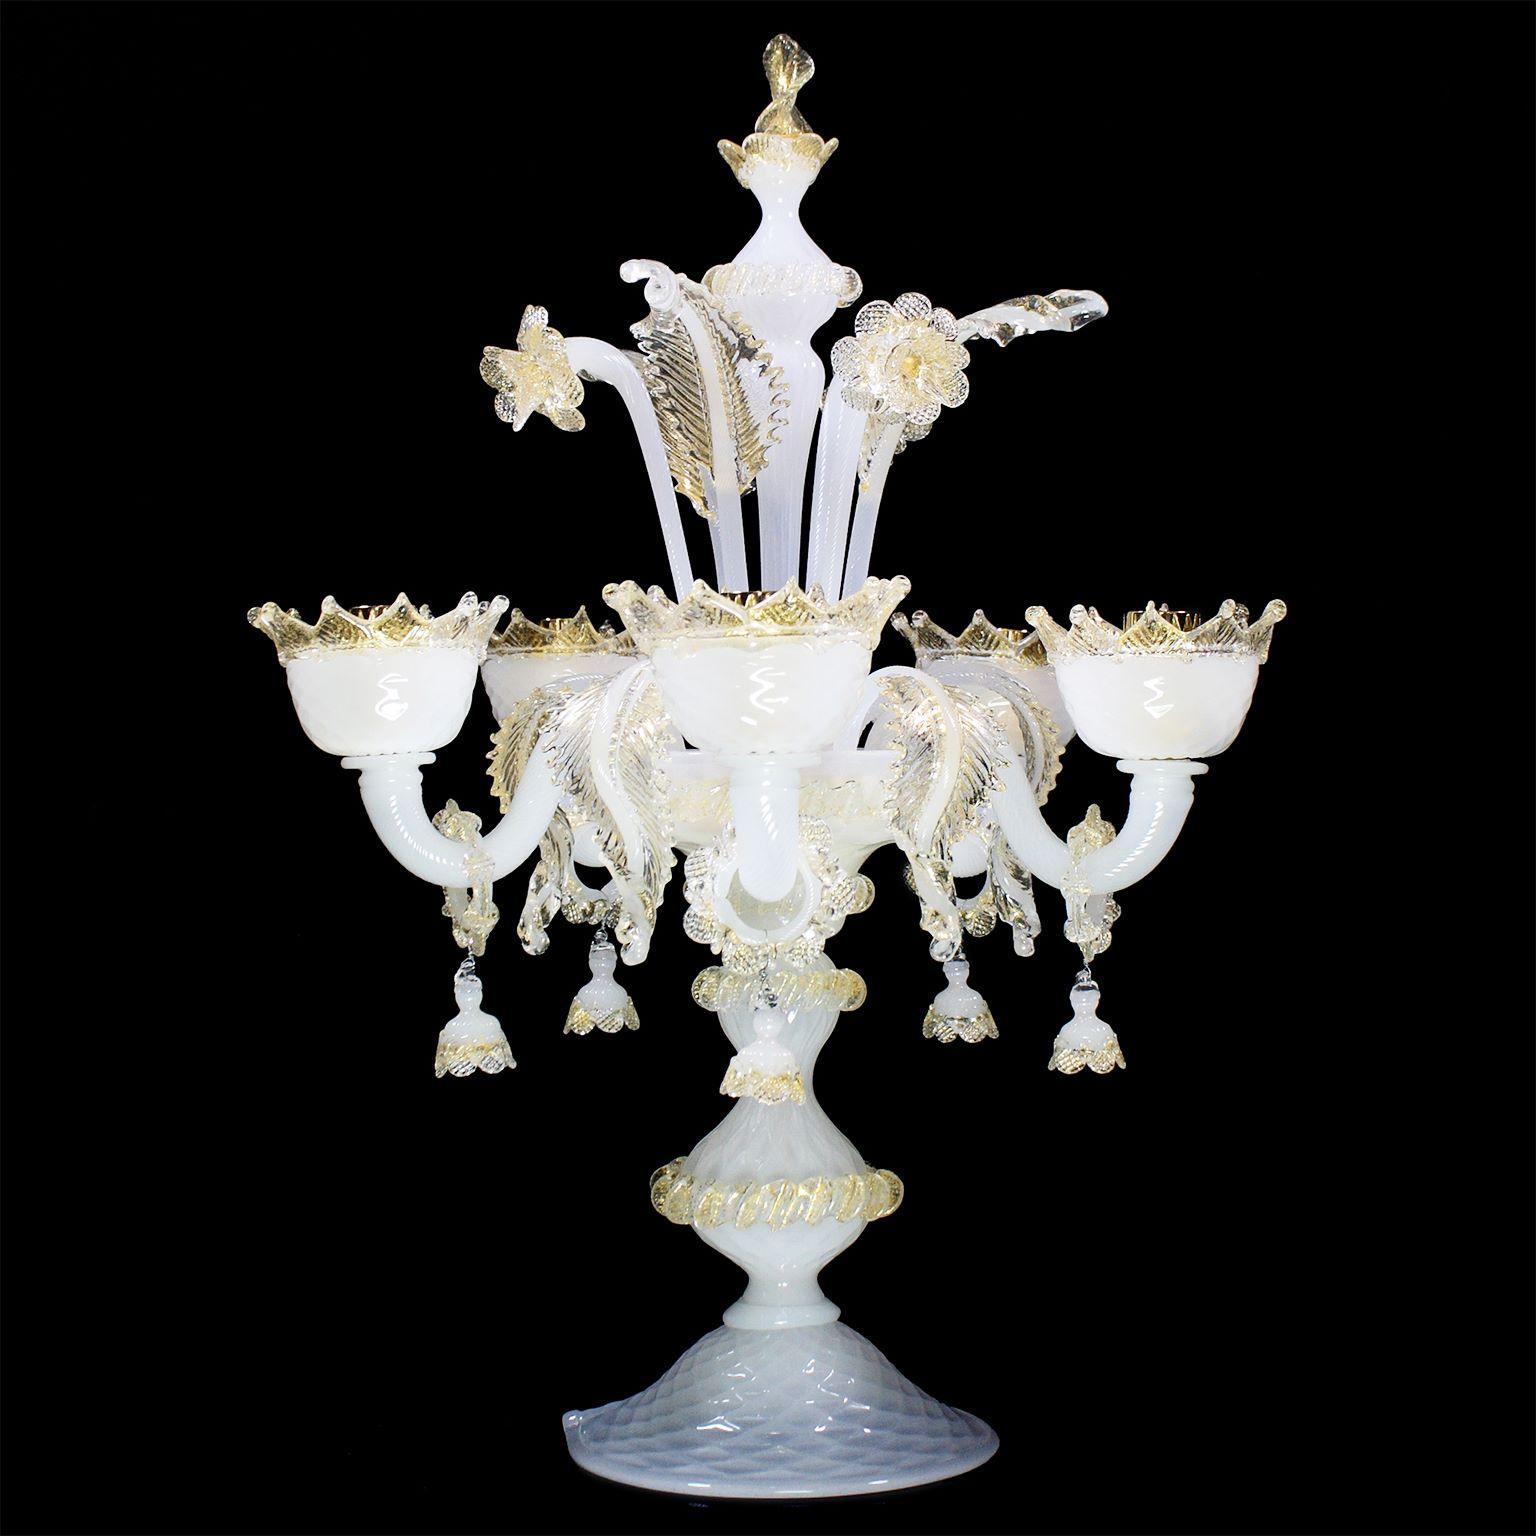 Classic Flambeau 5 arms white silk Murano glass gold details by Multiforme.
V-Classic 800 collection is designed with attention to details, and with the passion that makes us standing out. Each product (from the monumental chandeliers to the